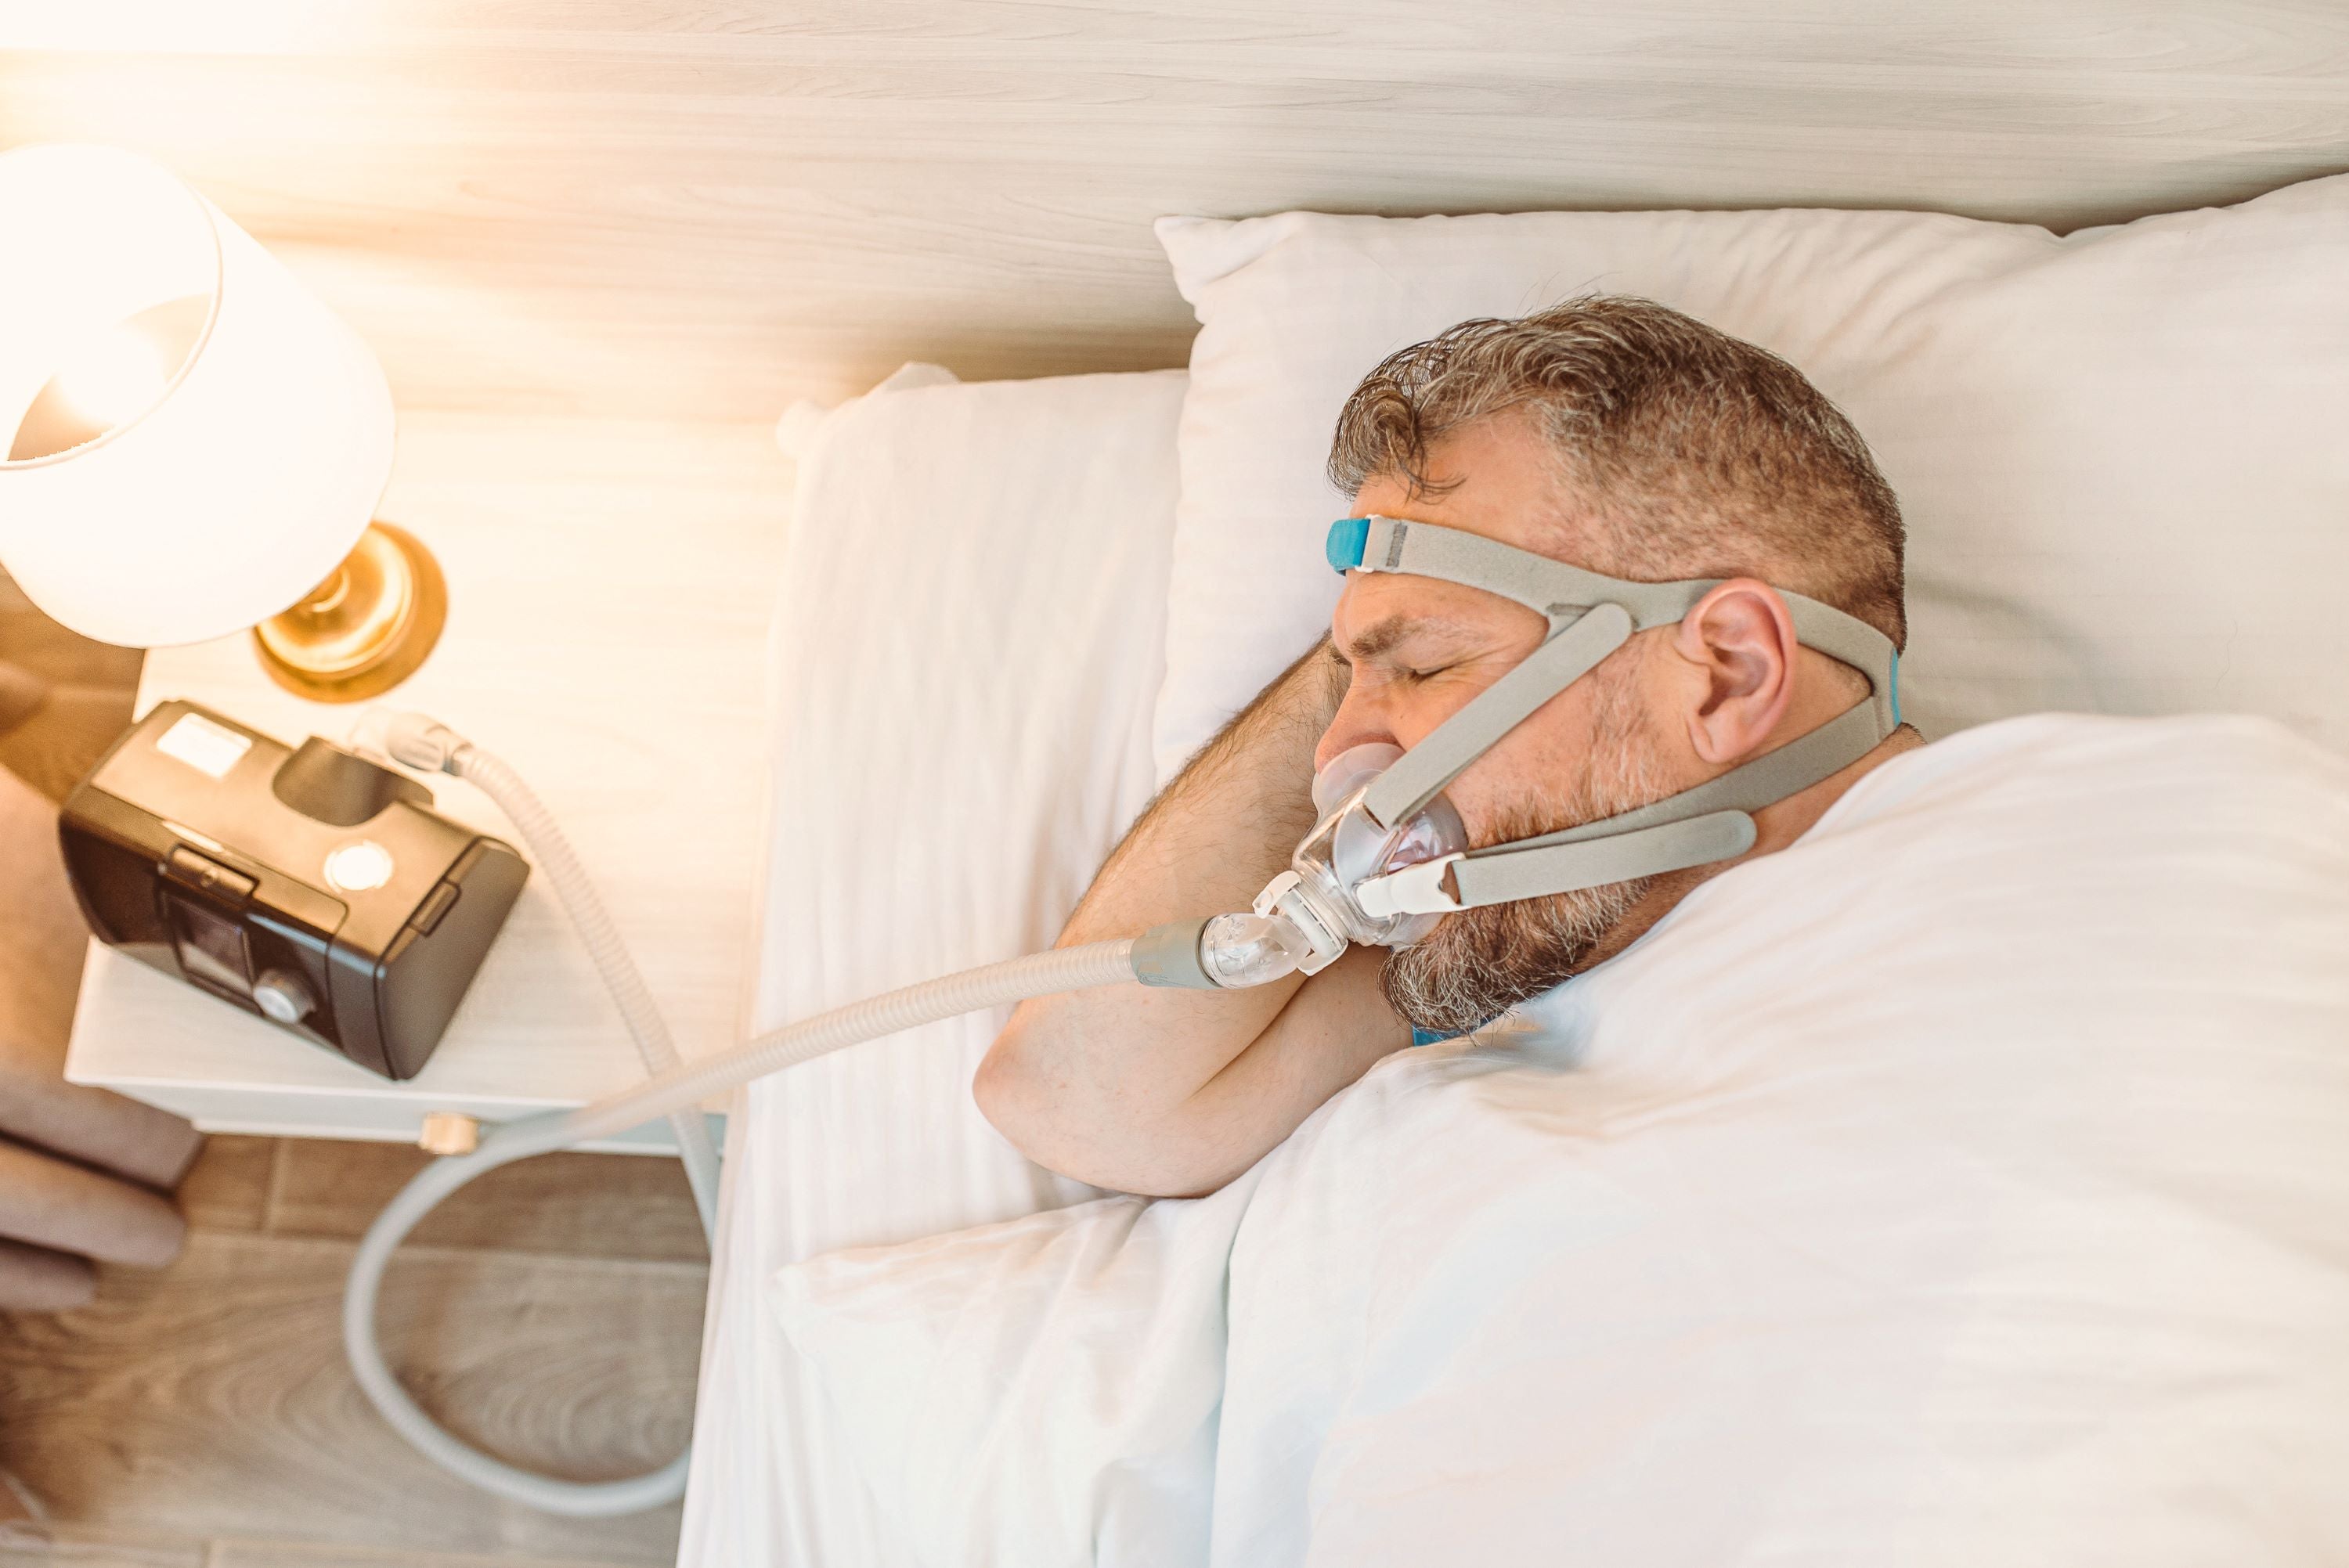 Sleeping man with chronic breathing issues considers using CPAP machine in bed